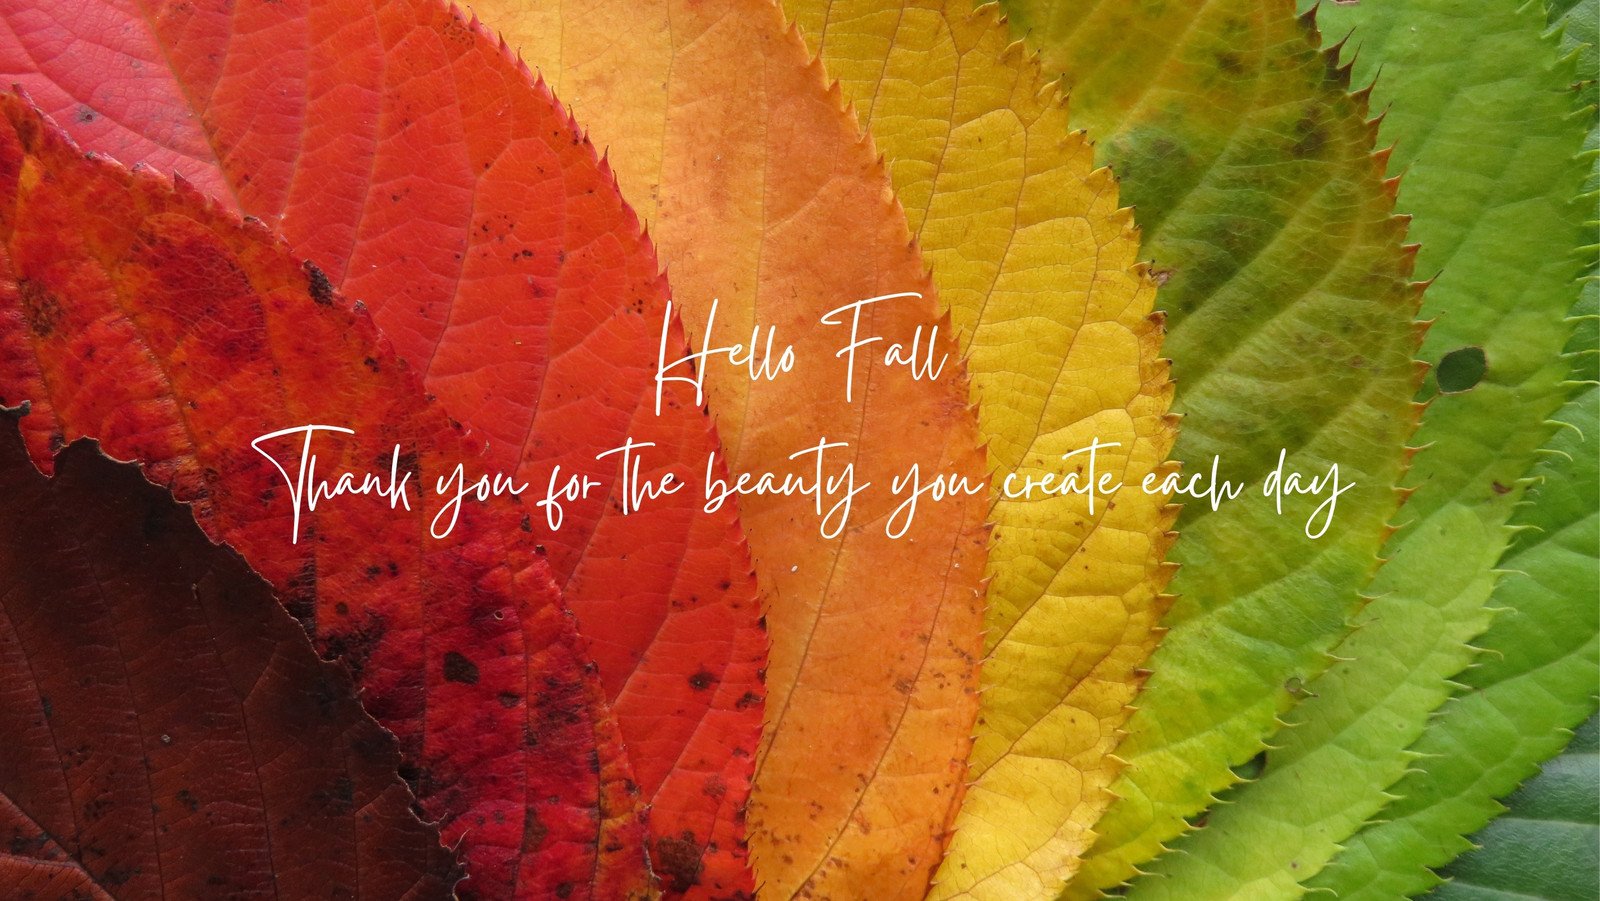 fall facebook cover photos with scripture